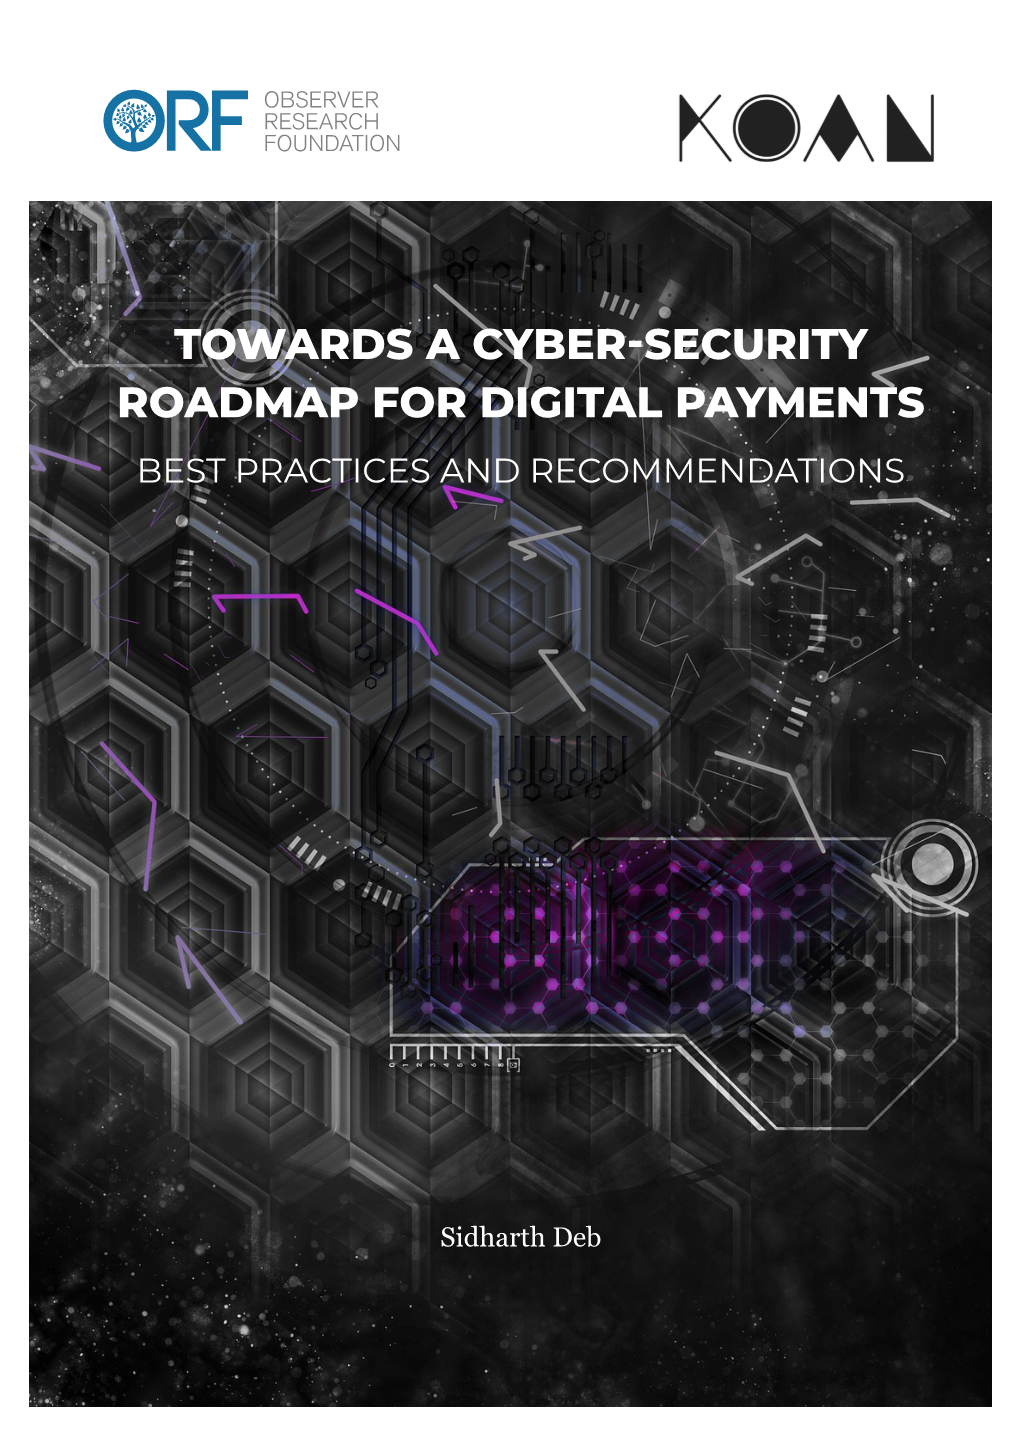 Towards a Cyber-Security Roadmap for Digital Payments Best Practices and Recommendations